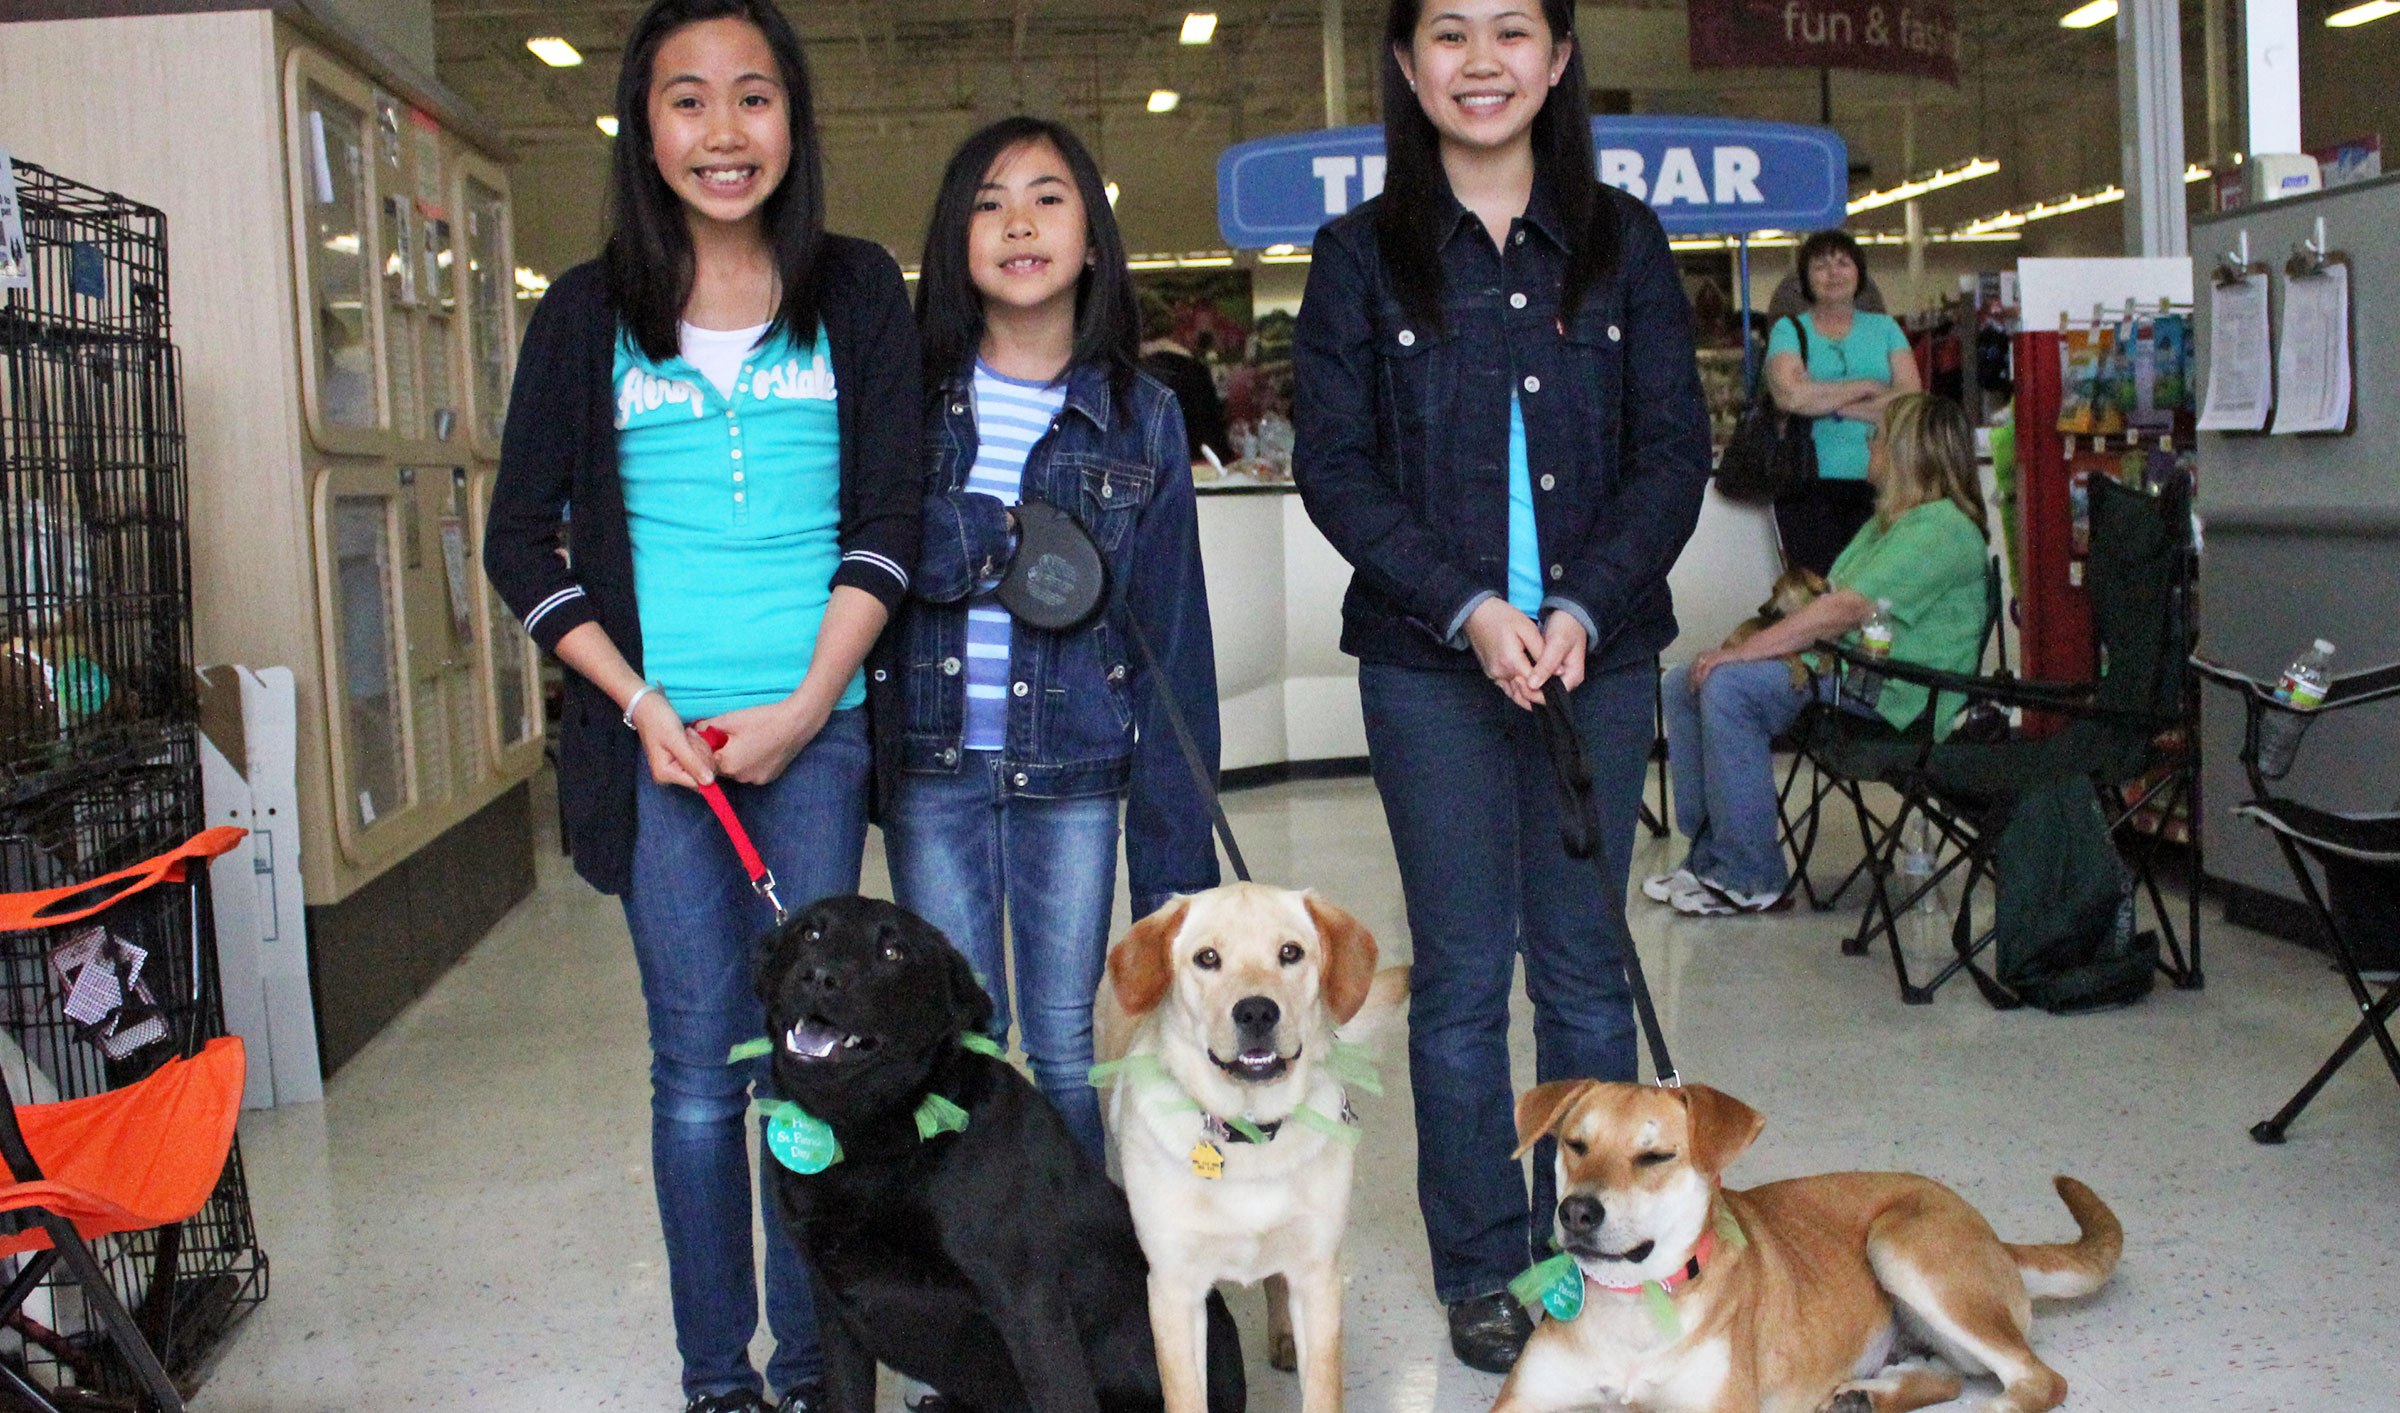 Student concert Saturday to benefit homeless pets